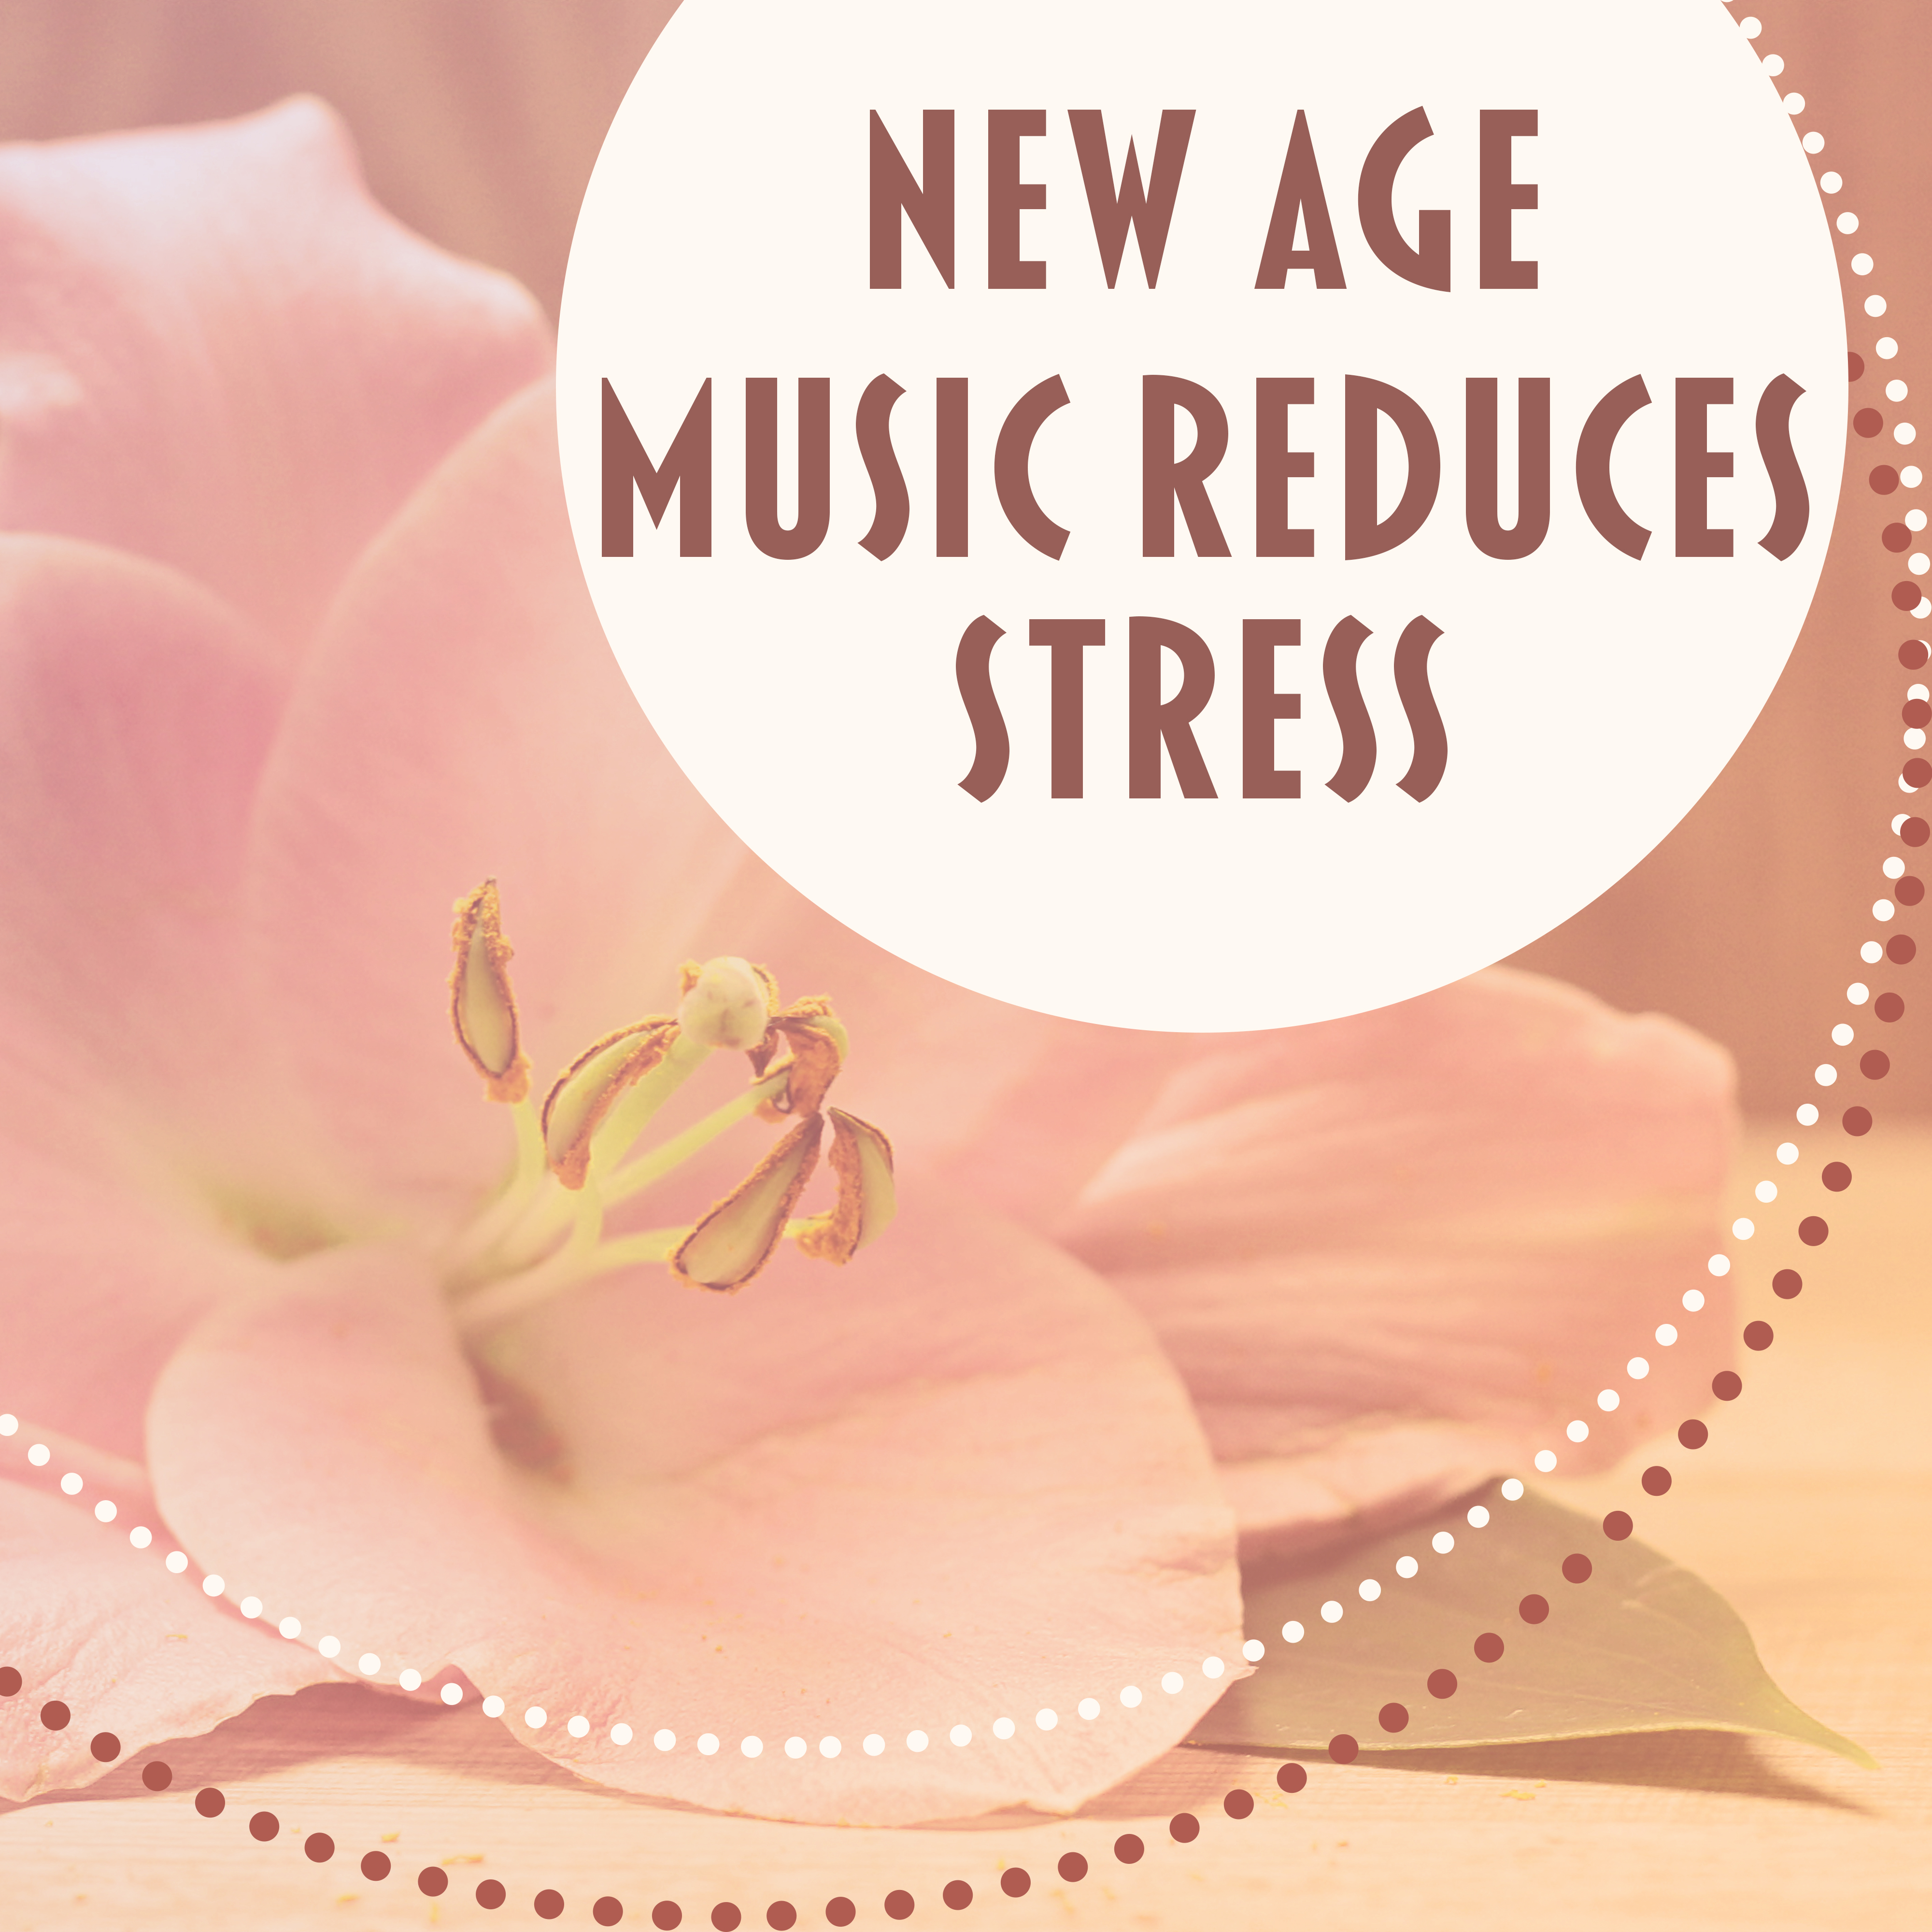 New Age Music Reduces Stress – Relaxation Sounds for Spa, Massage, Wellness, Deep Relief, Spa Dreams, Pure Mind, Peaceful Music